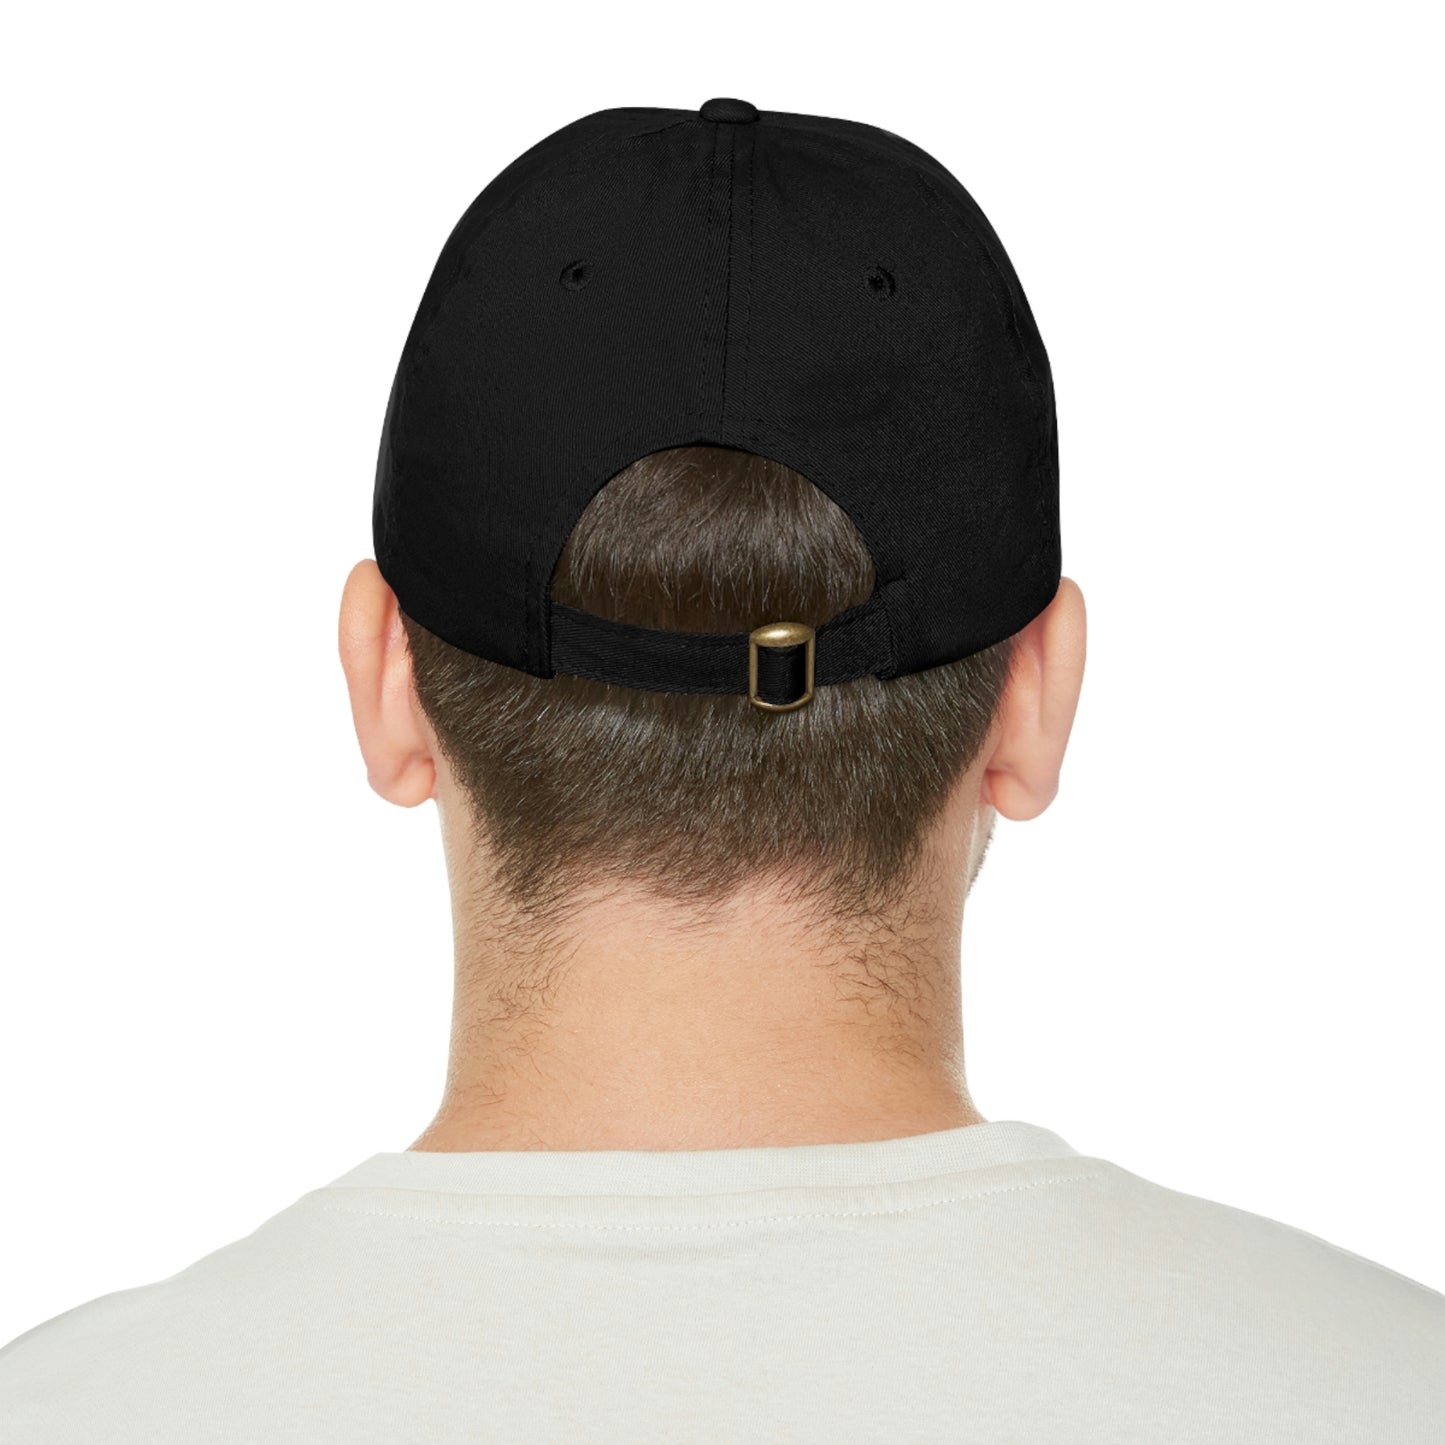 Horse Plus Logo Cap with Leather Patch (Round)